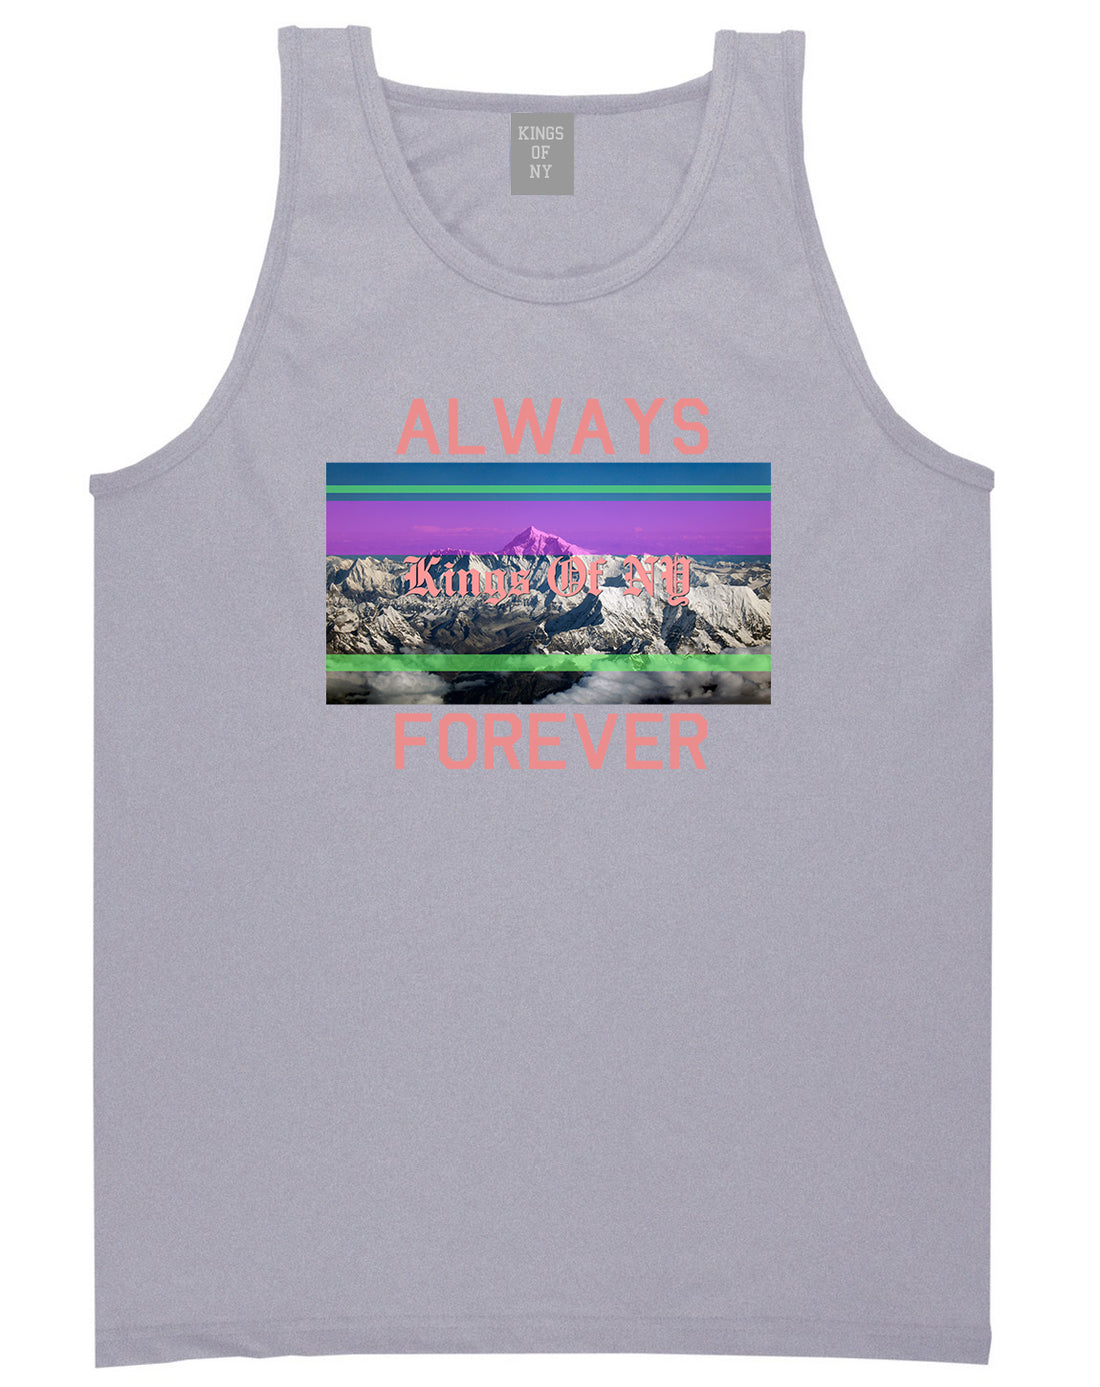 Mountains Always And Forever Mens Tank Top Shirt Grey by Kings Of NY